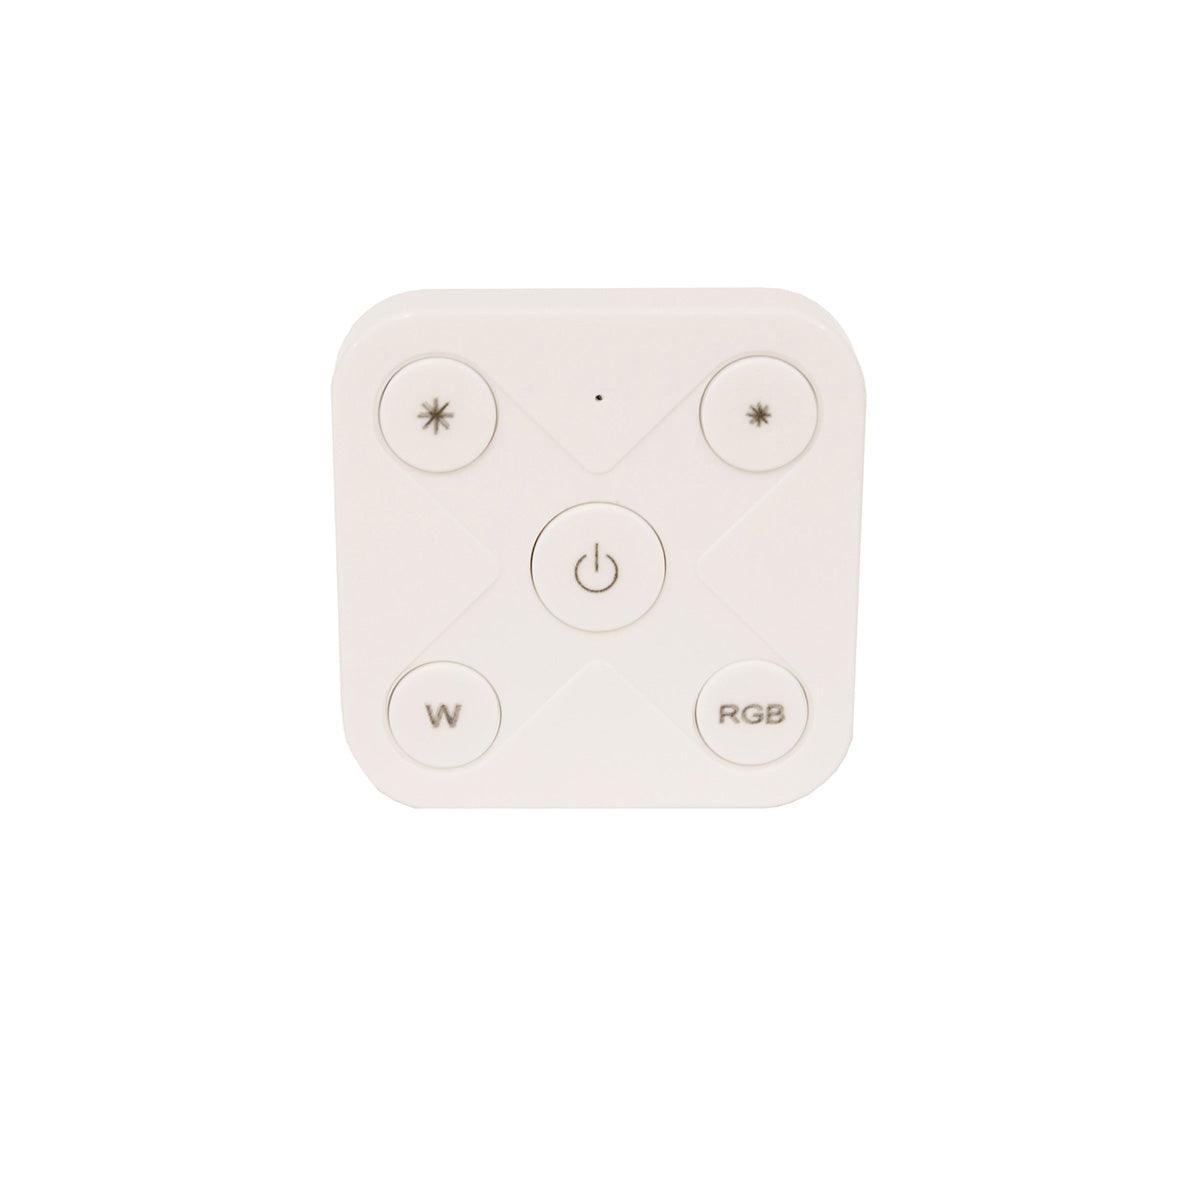 TOUCHDIAL Mini Remote RGB(W) Controller, Single Zone - Bees Lighting